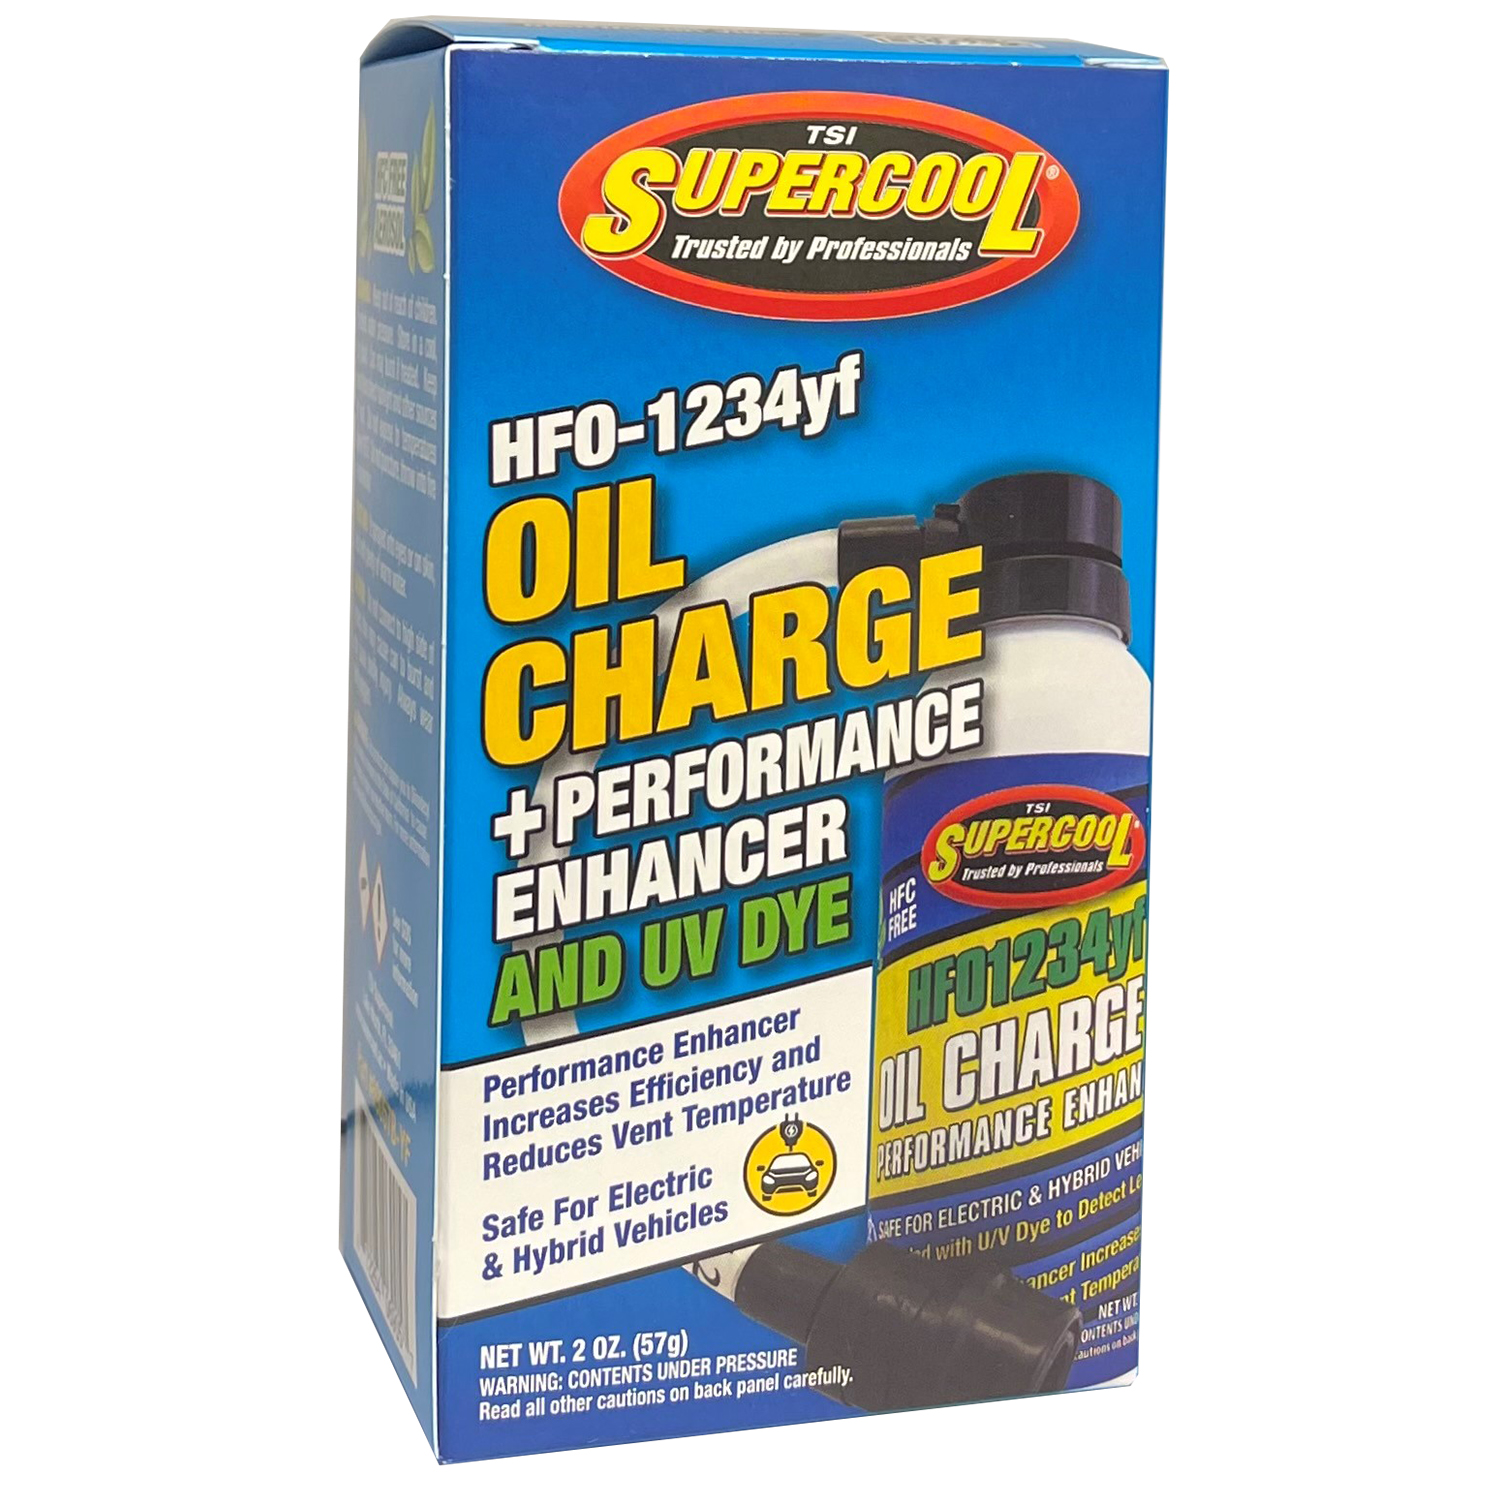 1234yf Oil Charge with Performance Enhancer & U/V Dye with Applicator Hose in Retail Box